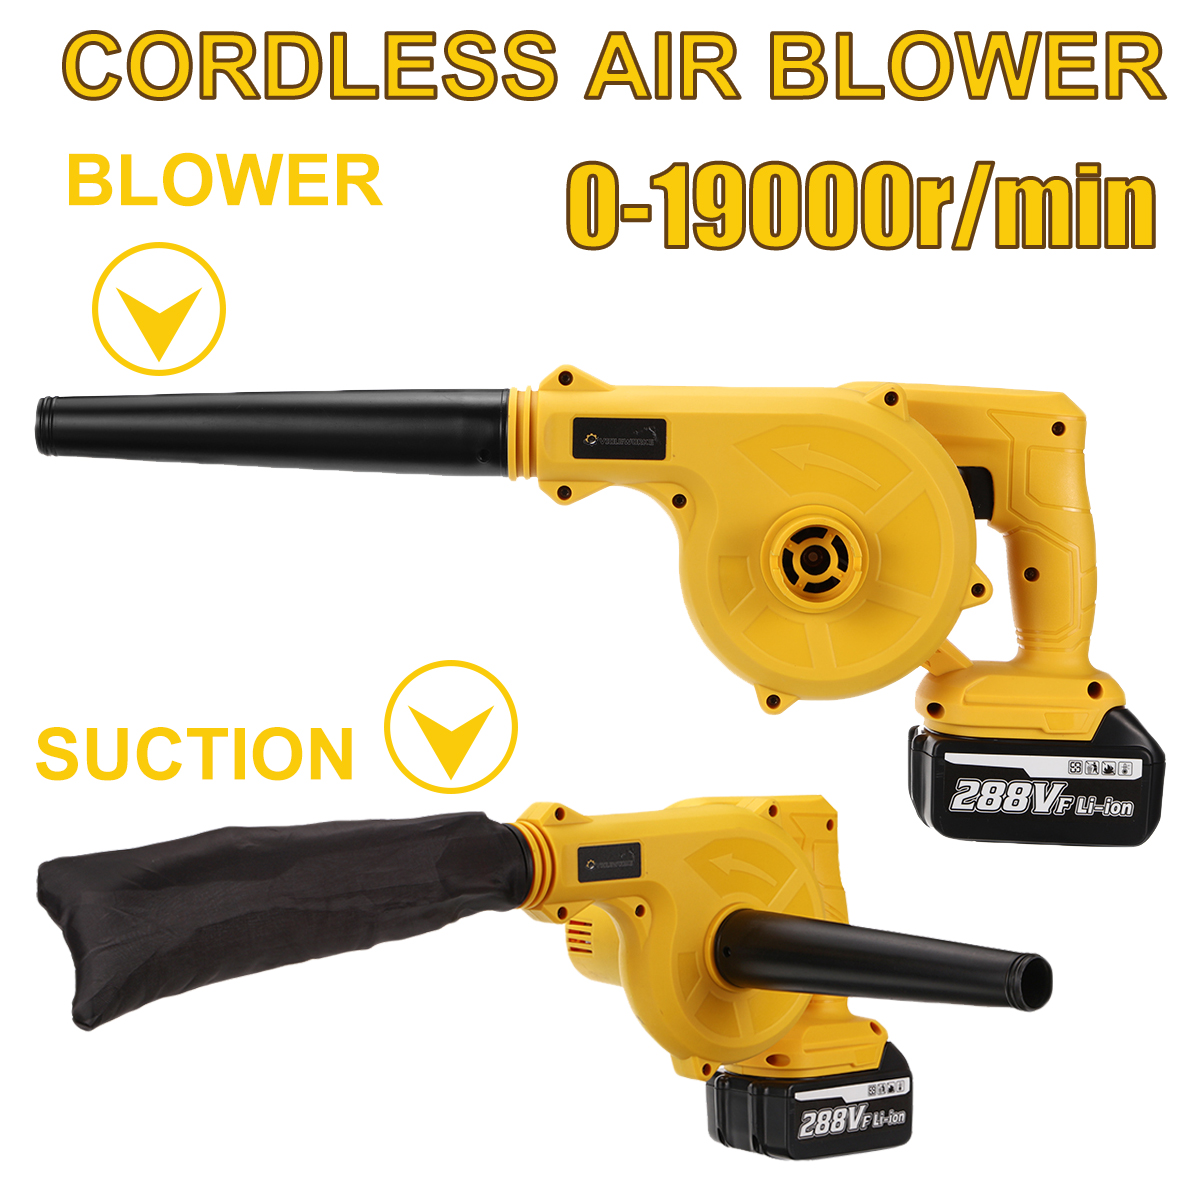 VIOLEWORKS-1500W-288VF-Cordless-Air-Blower-Rechargable-Air-Blowing-Suction-Dust-Collecting-Computer--1843546-3